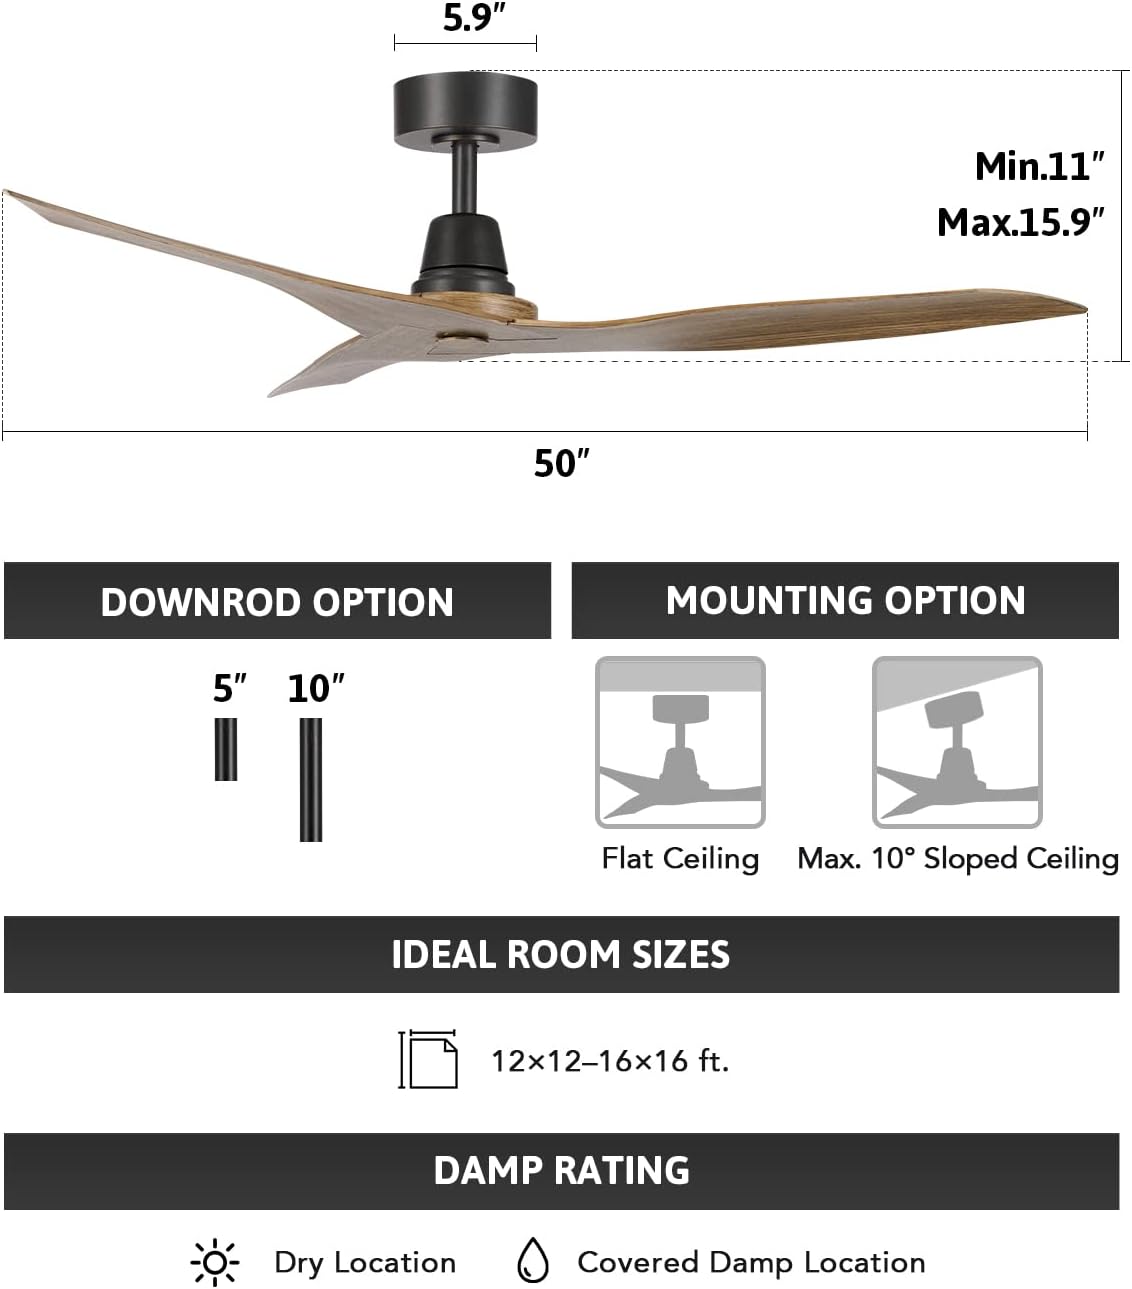 Smart Ceiling Fan with Light and Remote, 50' Modern Ceiling Fan Compatible with Alexa Google Voice Control, Indoor Outdoor Ceiling Fans for Bedroom Living Room, 6 Speeds & Reversible, C-Walnut (C-W